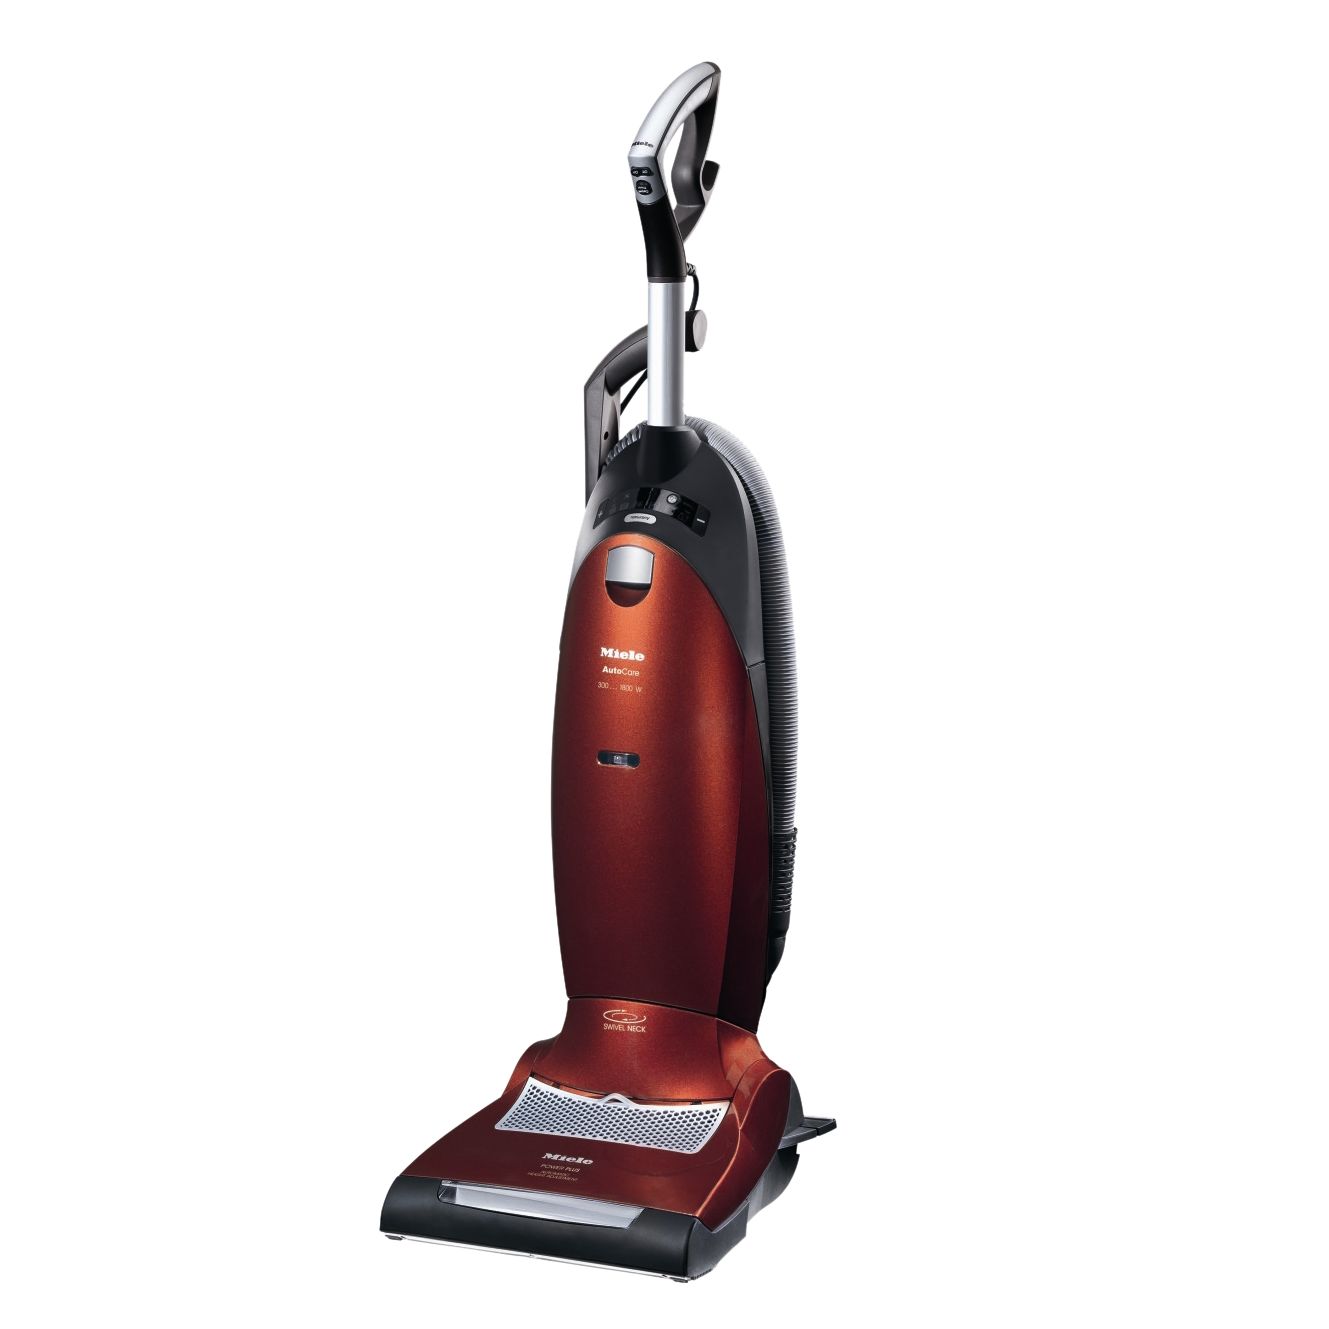 Miele S7510 AutoCare Upright Cleaner, Red at John Lewis